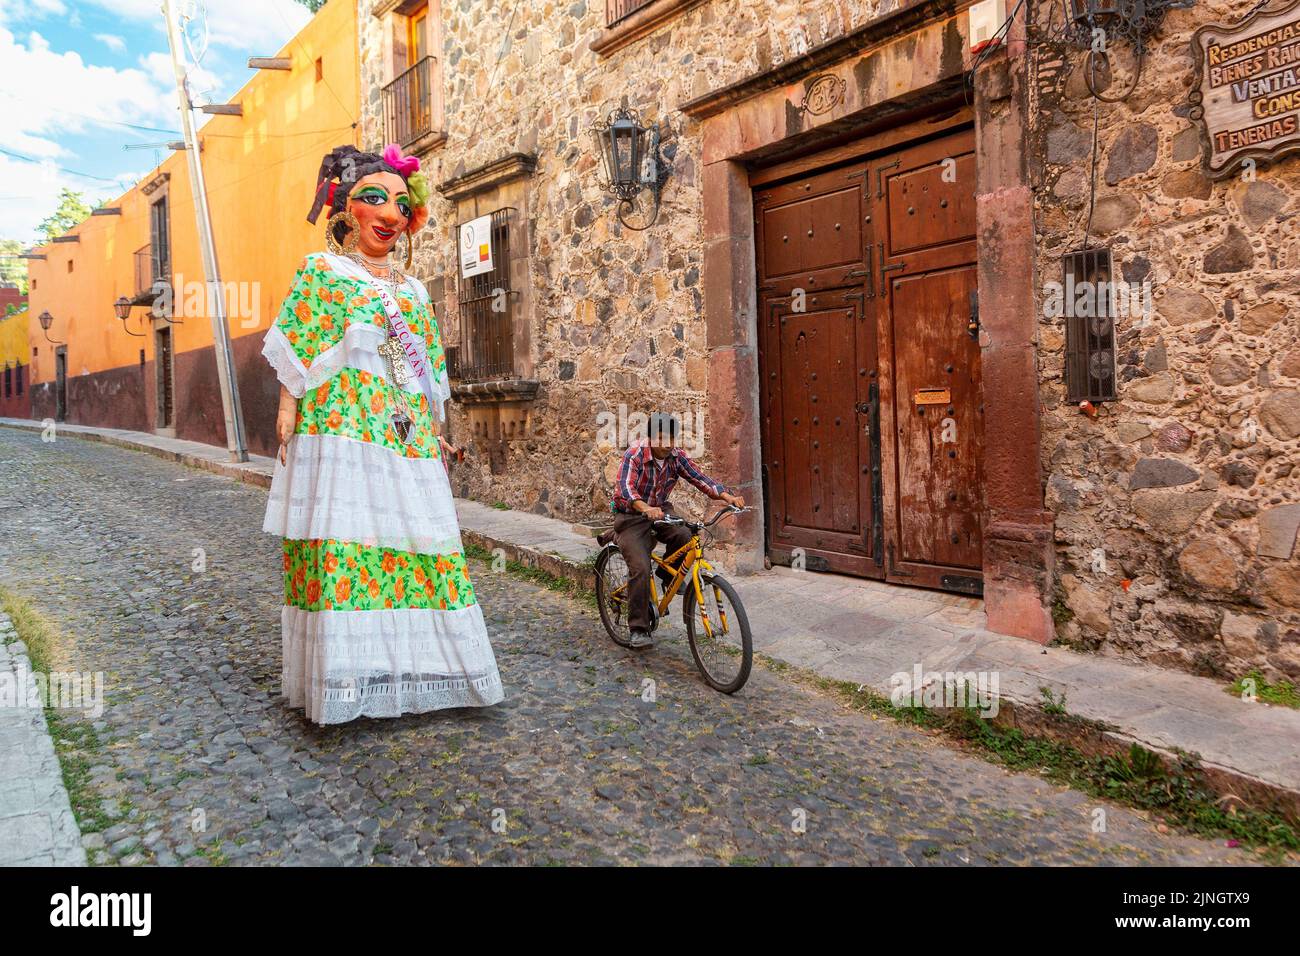 A bicyclist passes a mojiganga, or giant puppet made from papier mâché as it walks through the historic city center of San Miguel de Allende, Mexico. Stock Photo